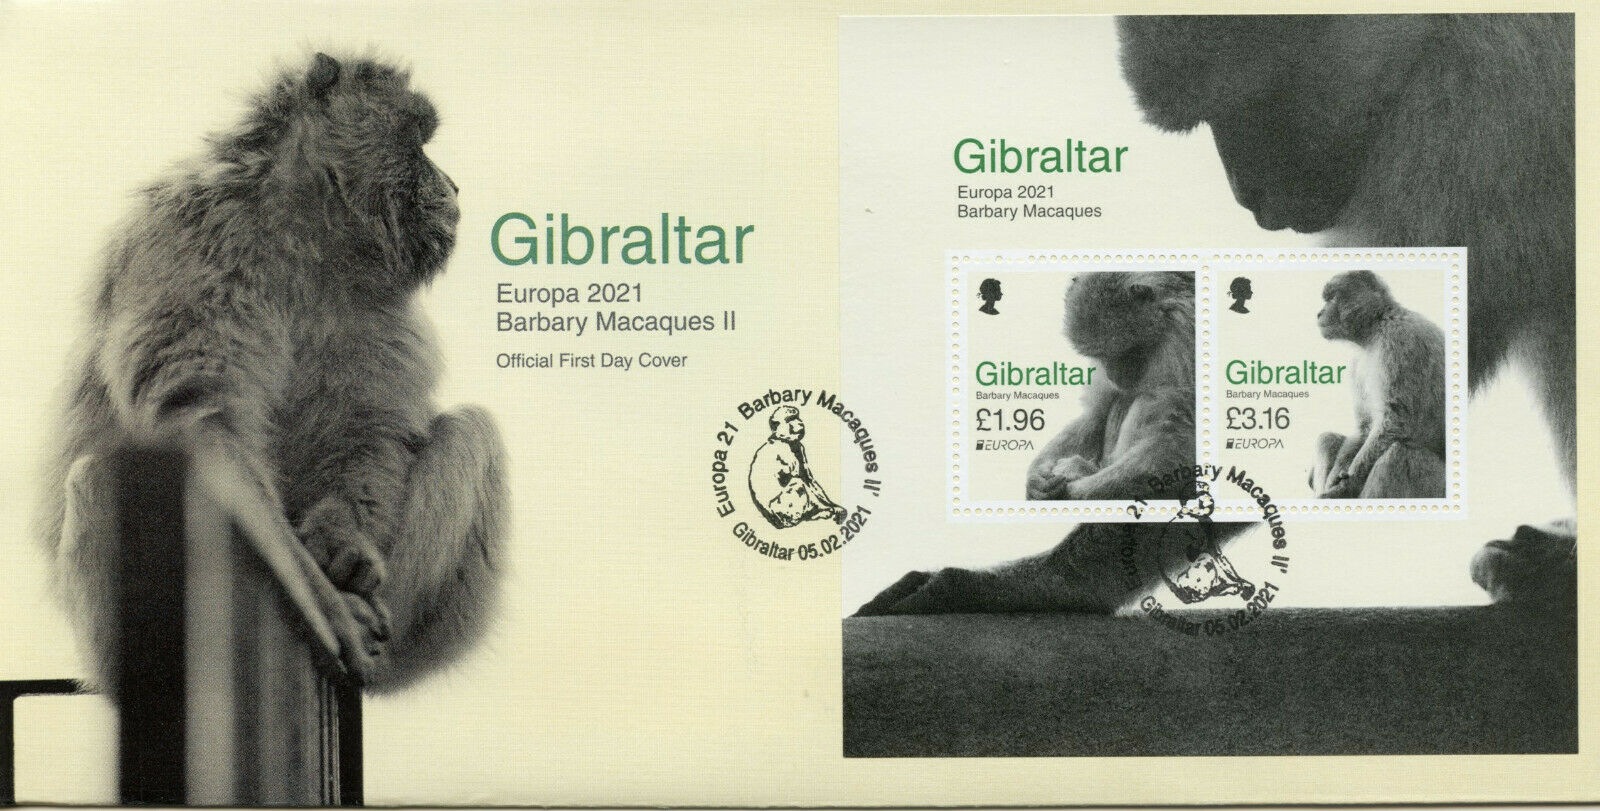 Gibraltar Europa Stamps 2021 FDC Barbary Macaques Endangered Ntl Wildlife 2v M/S